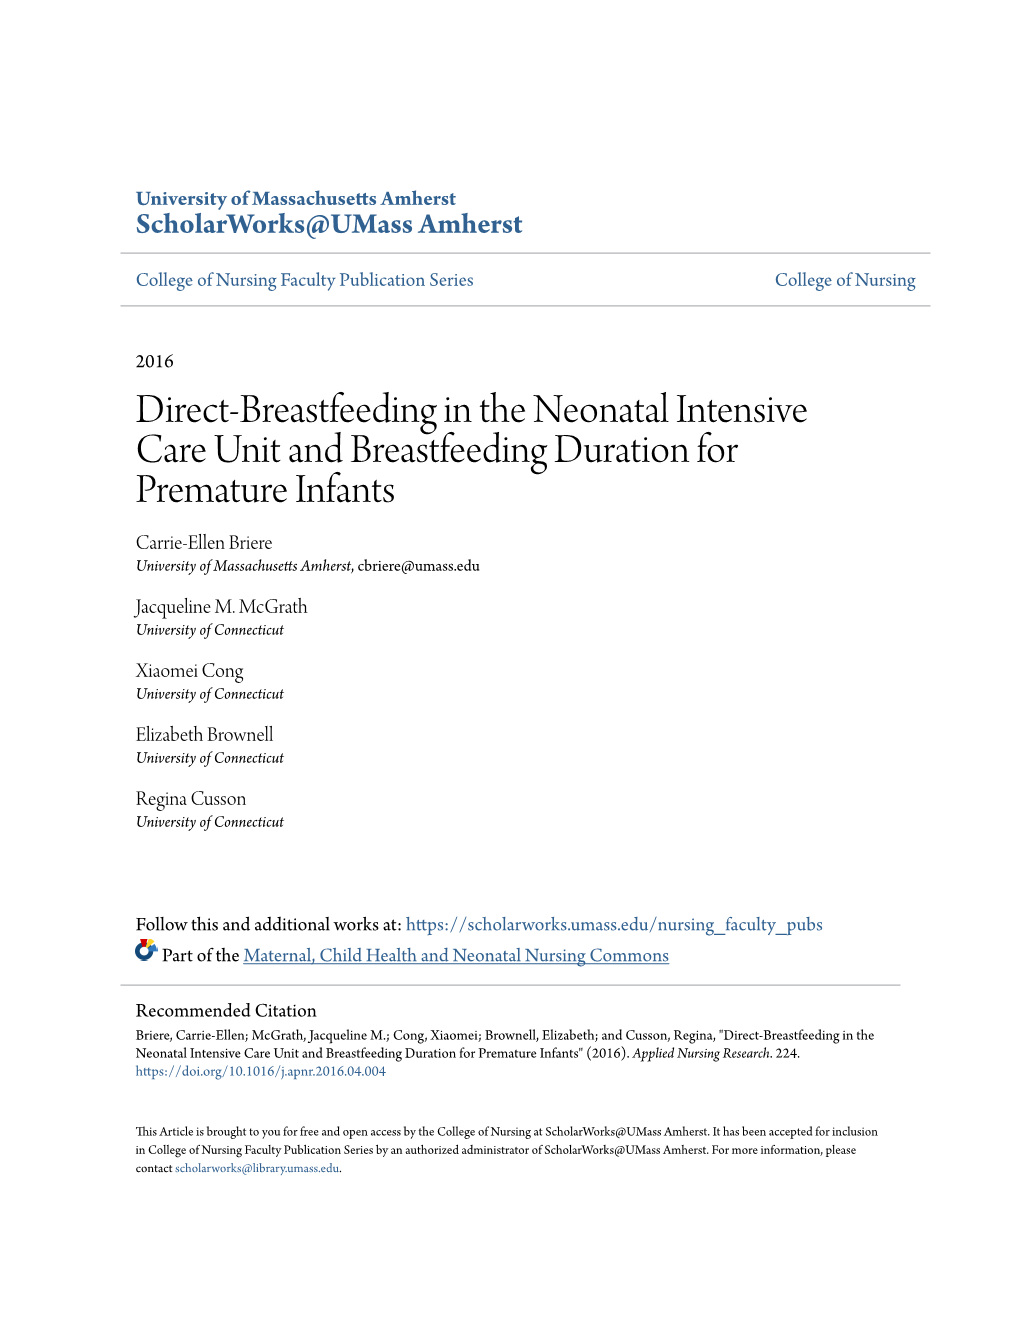 Direct-Breastfeeding in the Neonatal Intensive Care Unit And